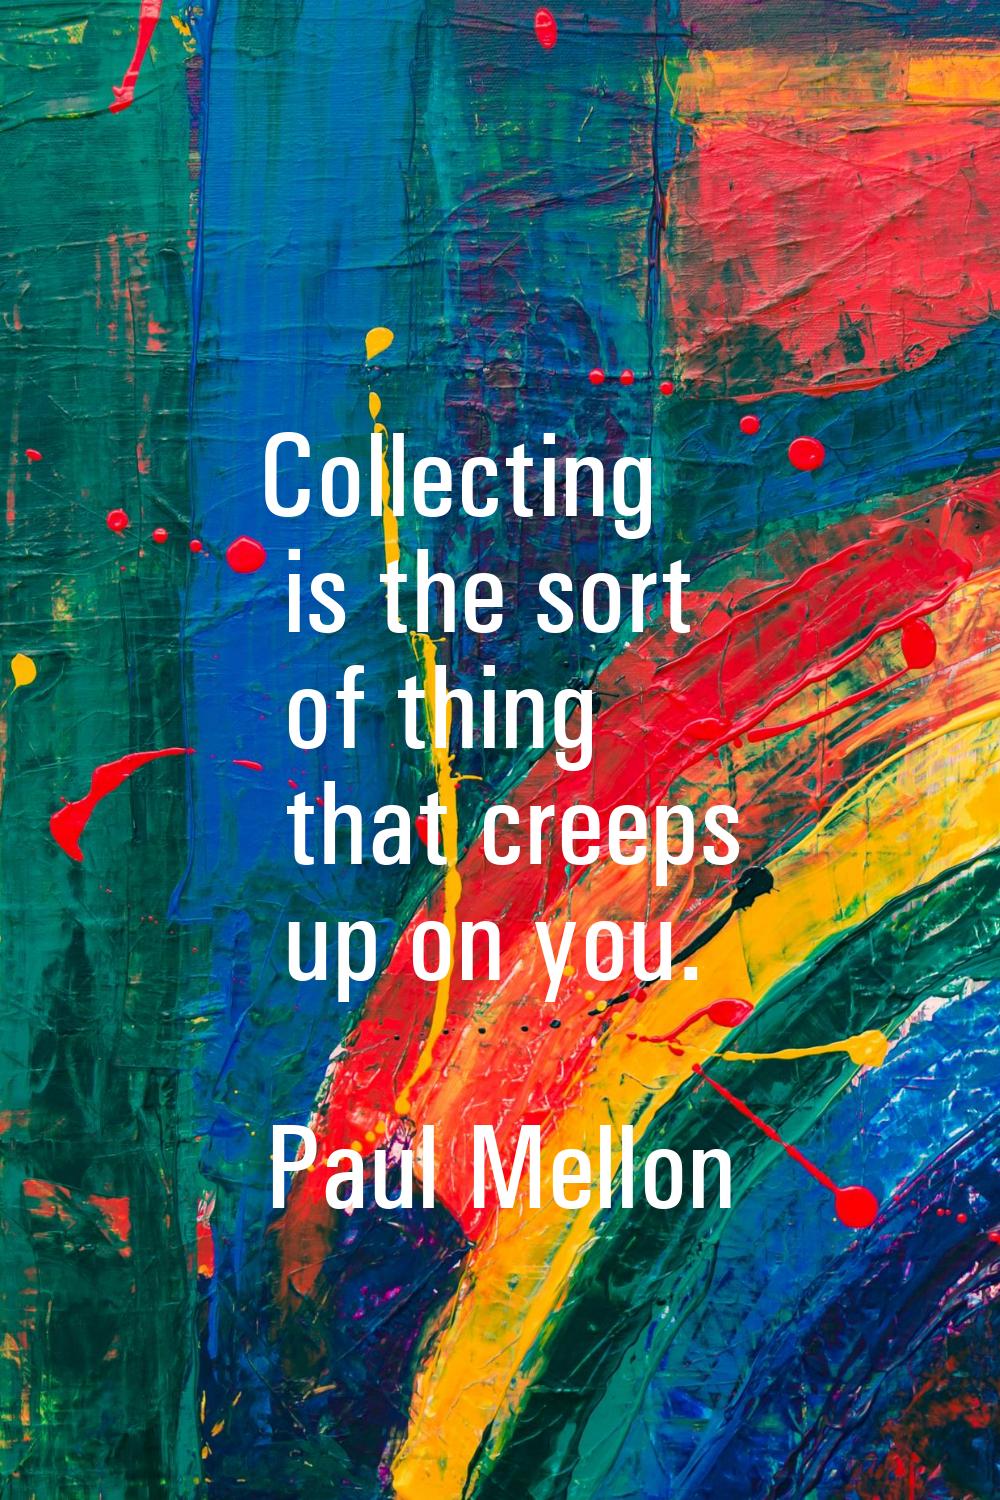 Collecting is the sort of thing that creeps up on you.